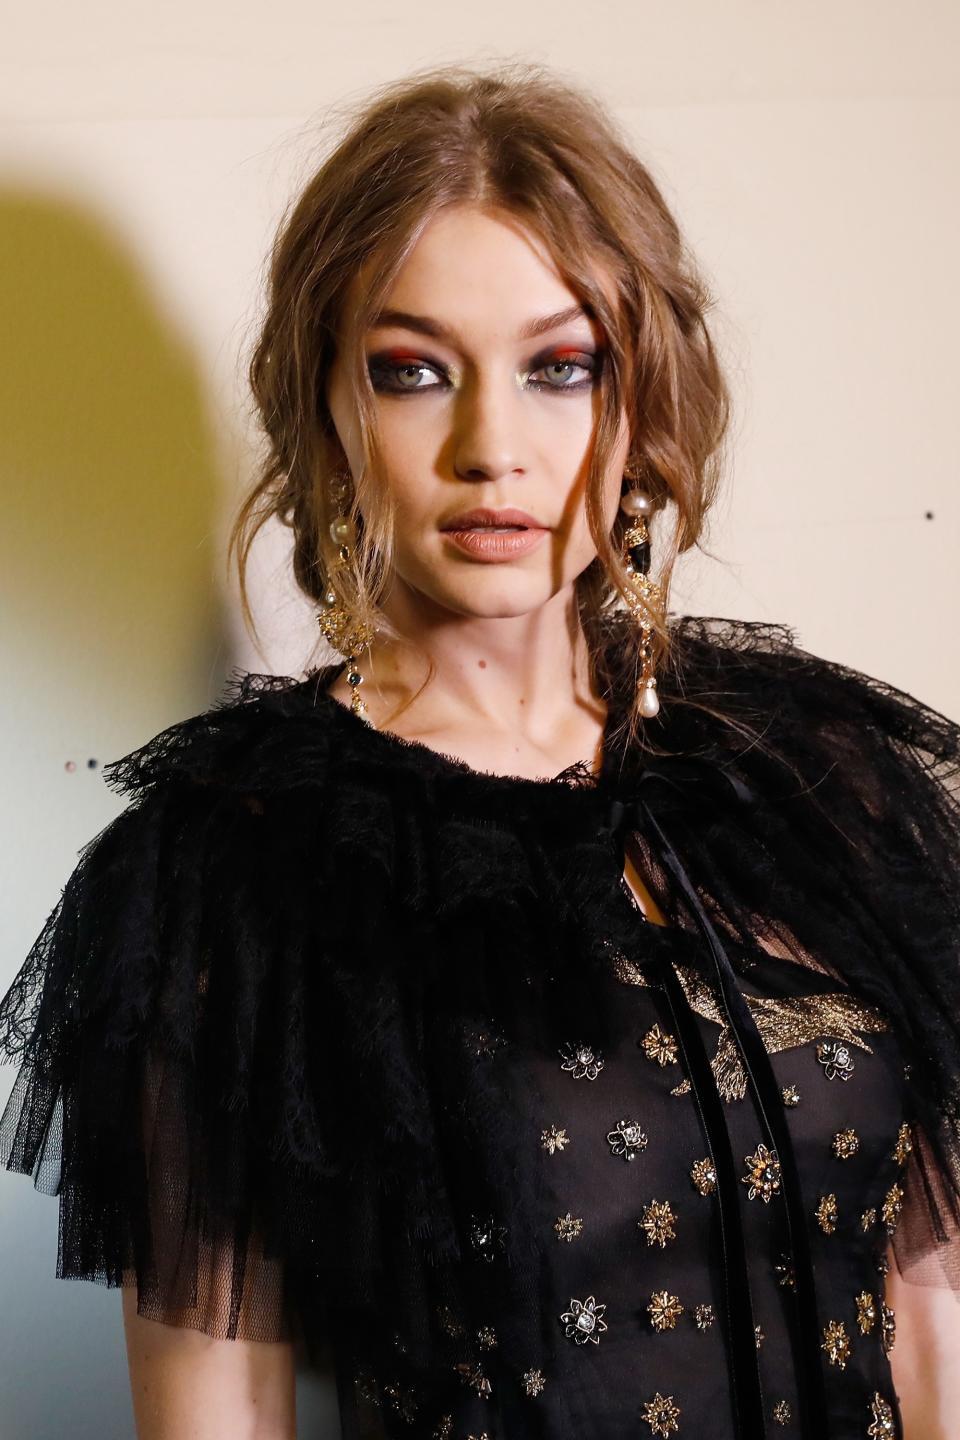 Backstage at Alberta Ferretti fall 2017, makeup artist Tom Pecheux showed us how to make red eye shadow look incredibly sexy.